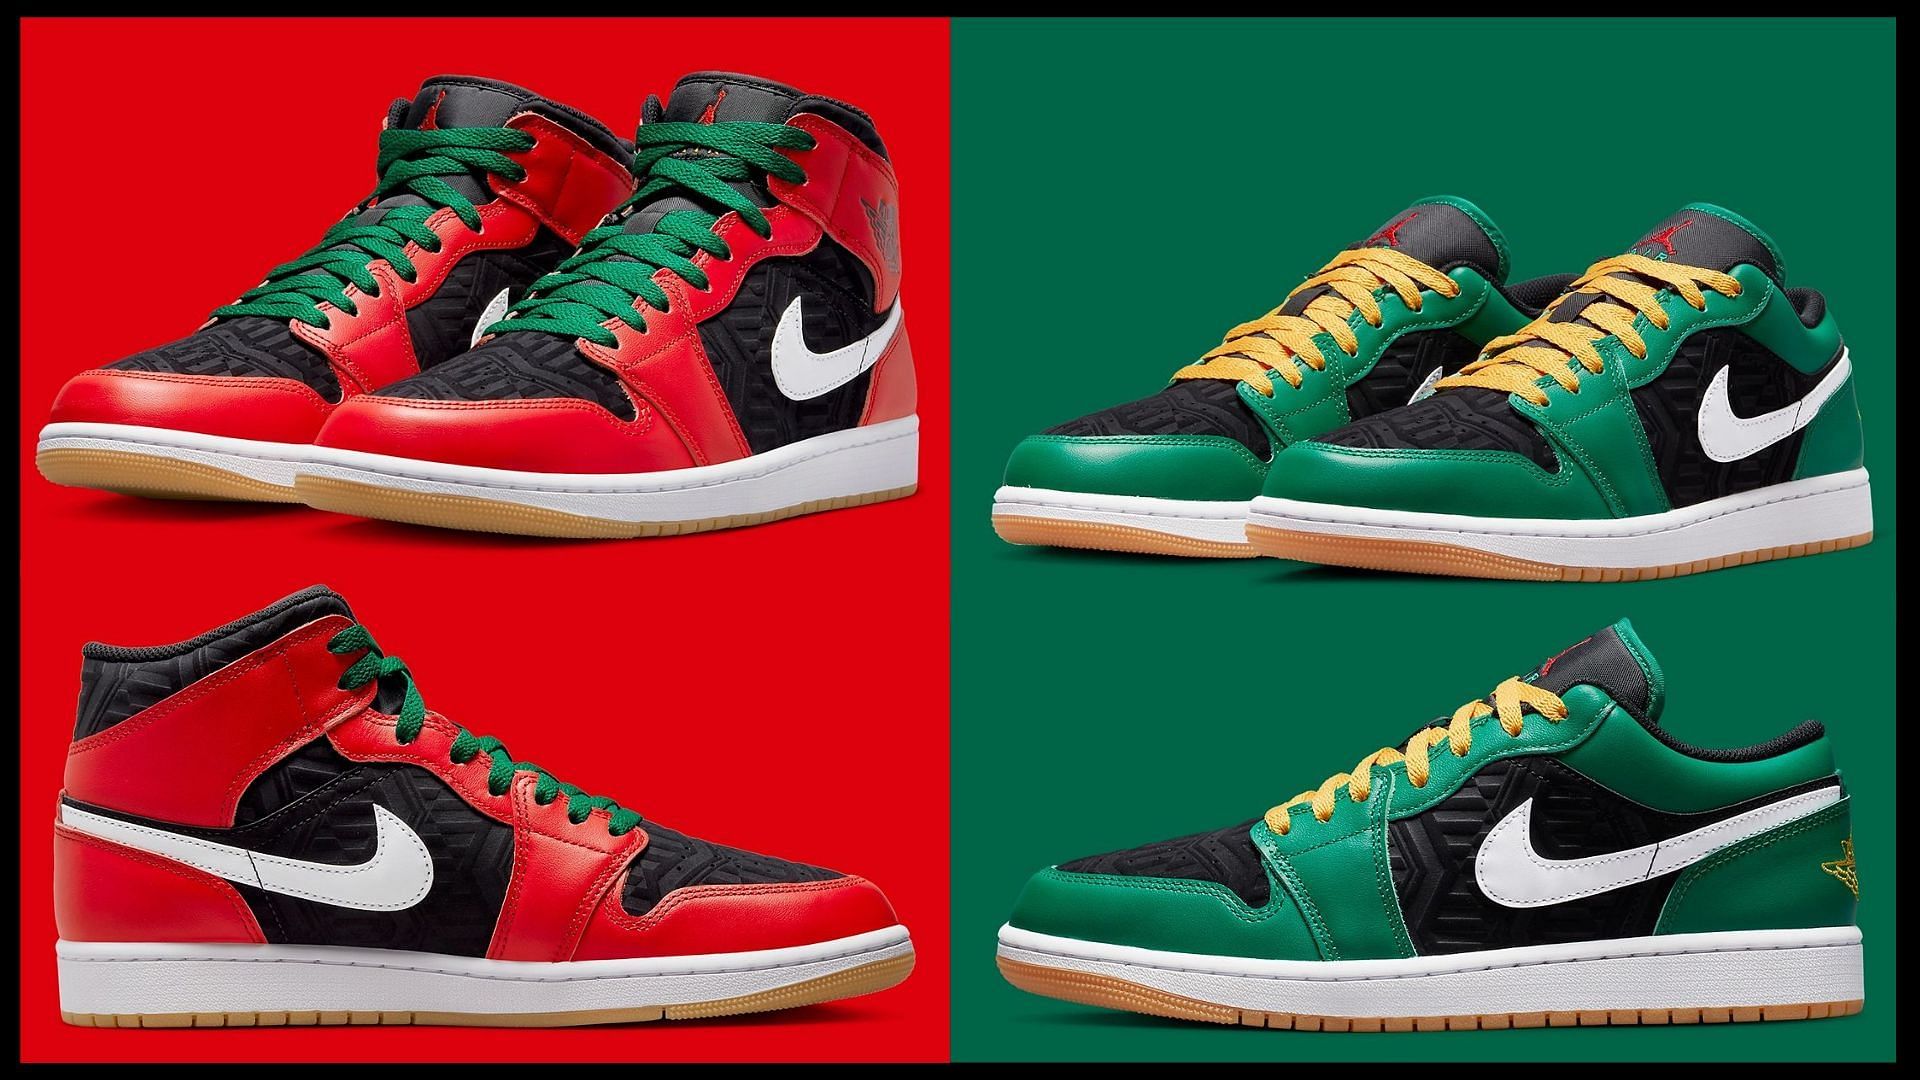 Where to buy Air Jordan 1 Mid and Low Christmas colorways? Price and